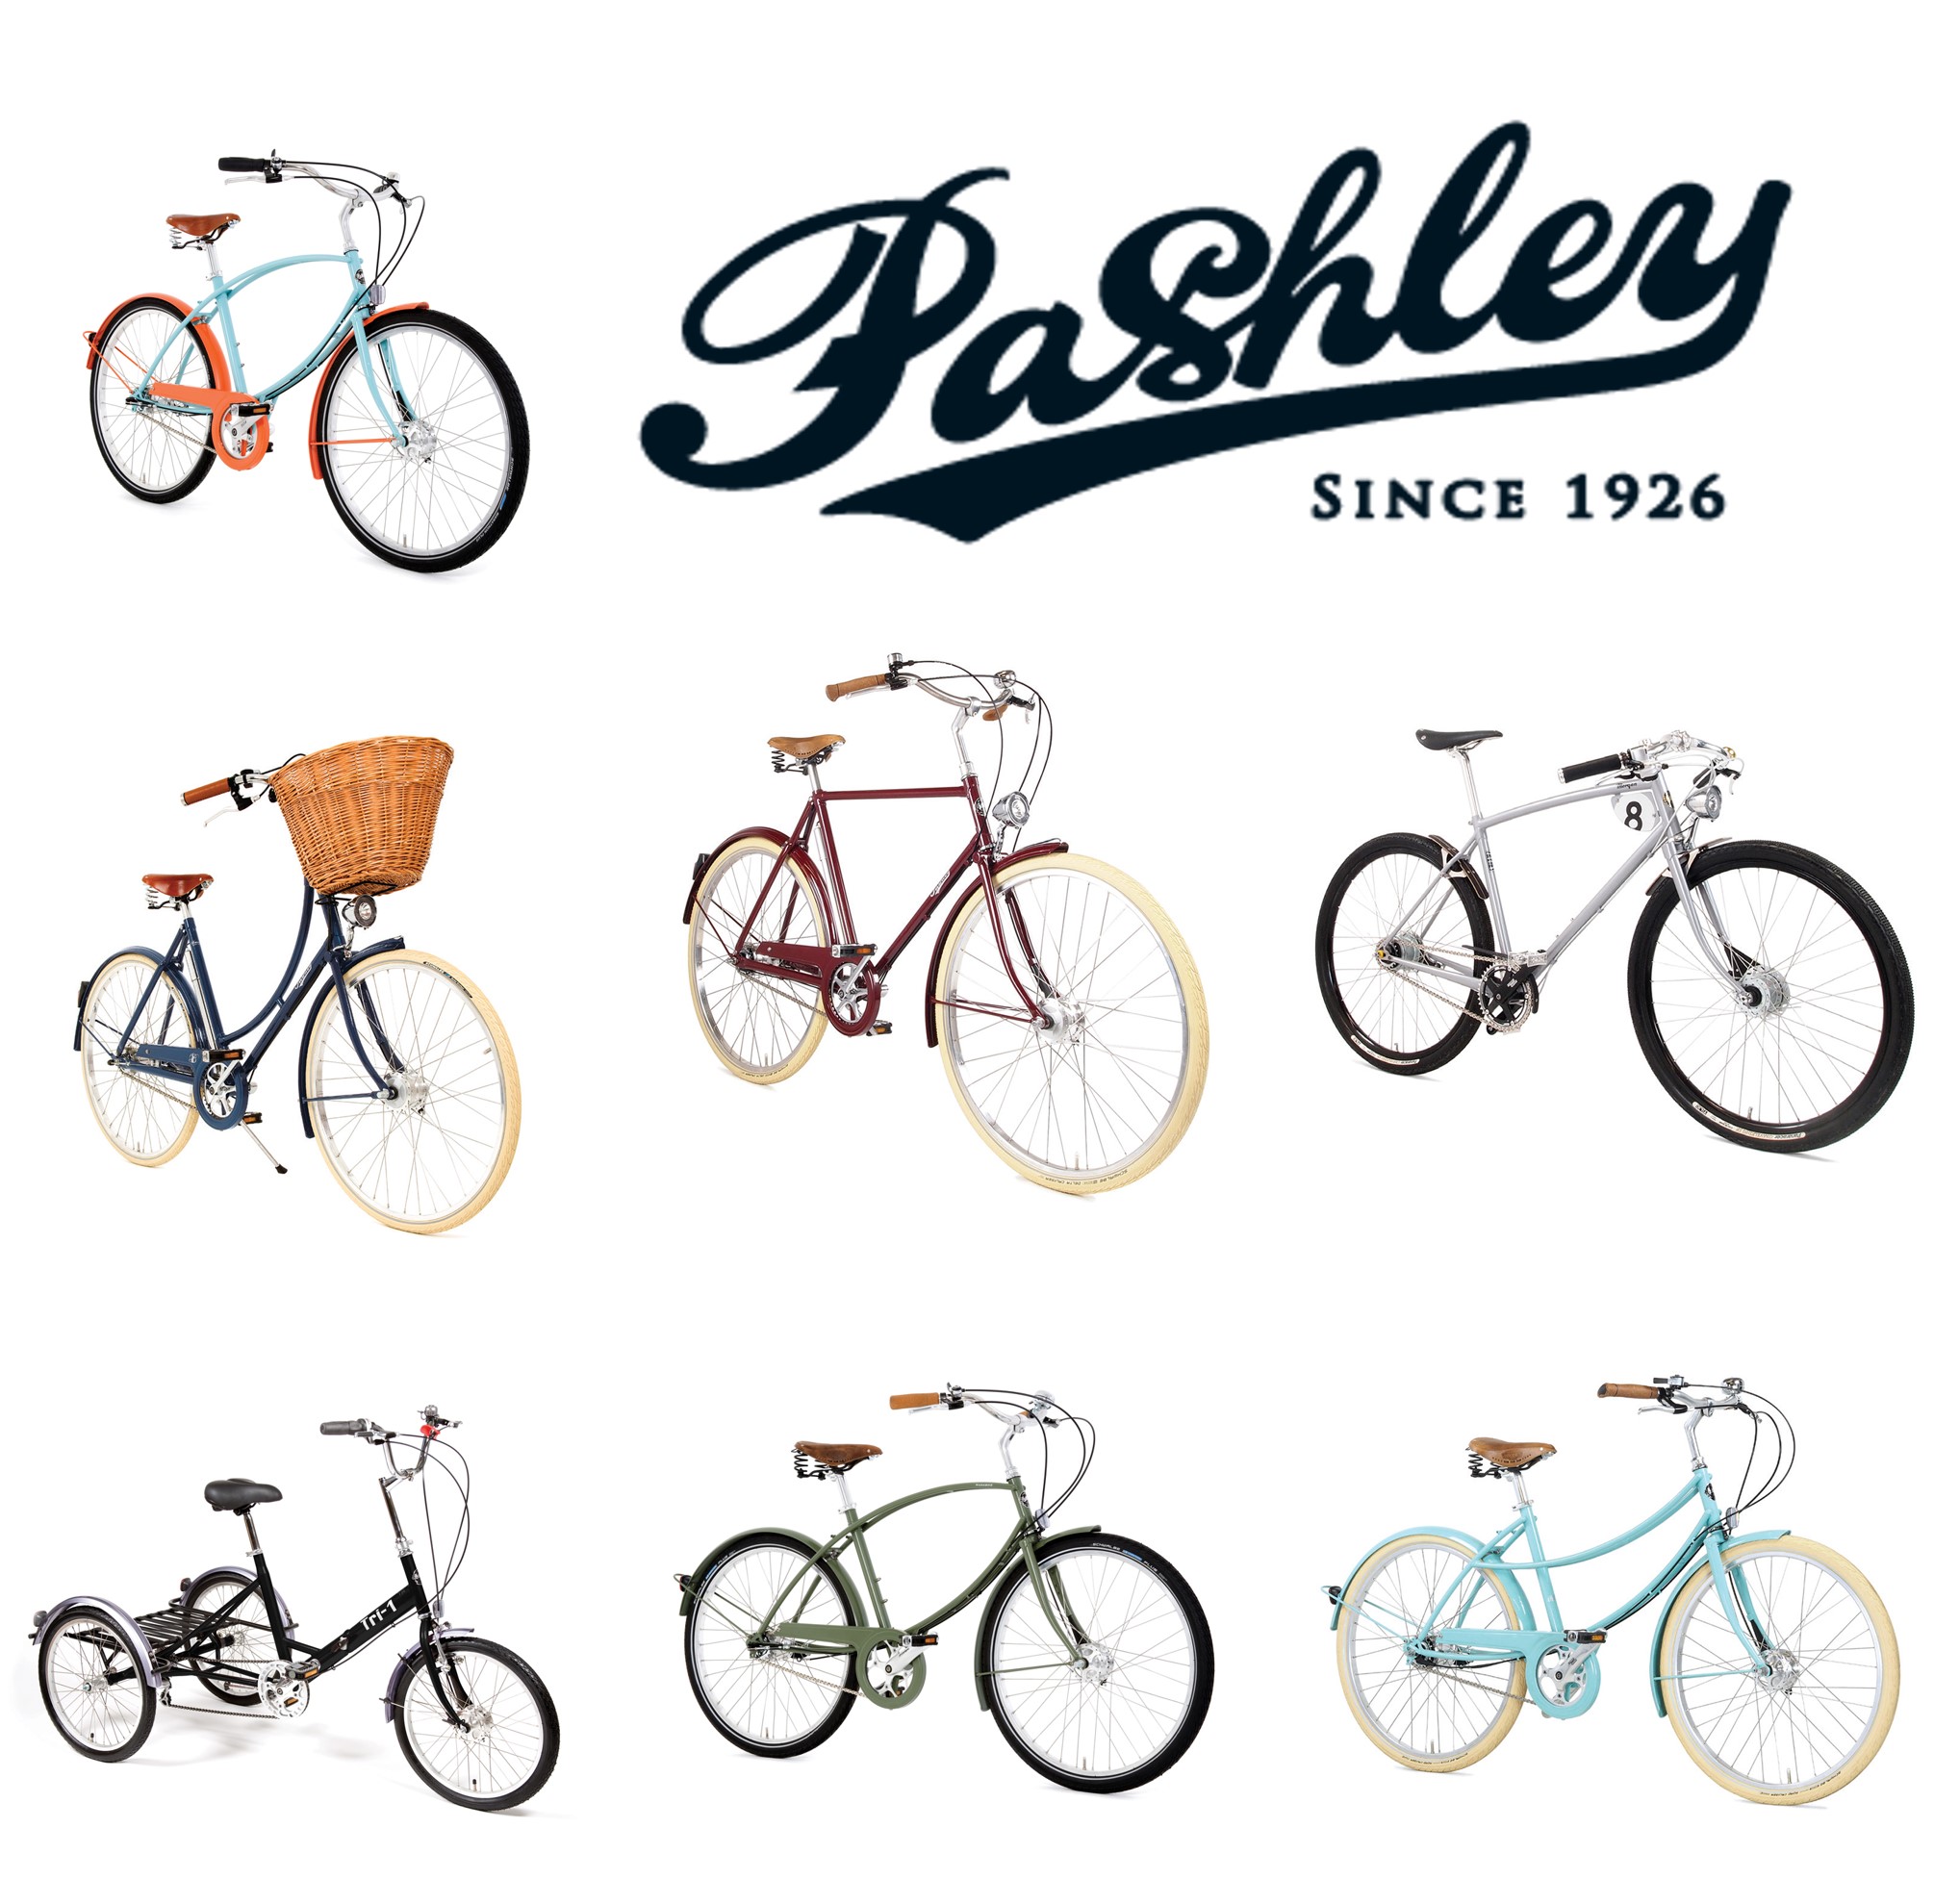 Pashley Cycles | Best Price Guarantee